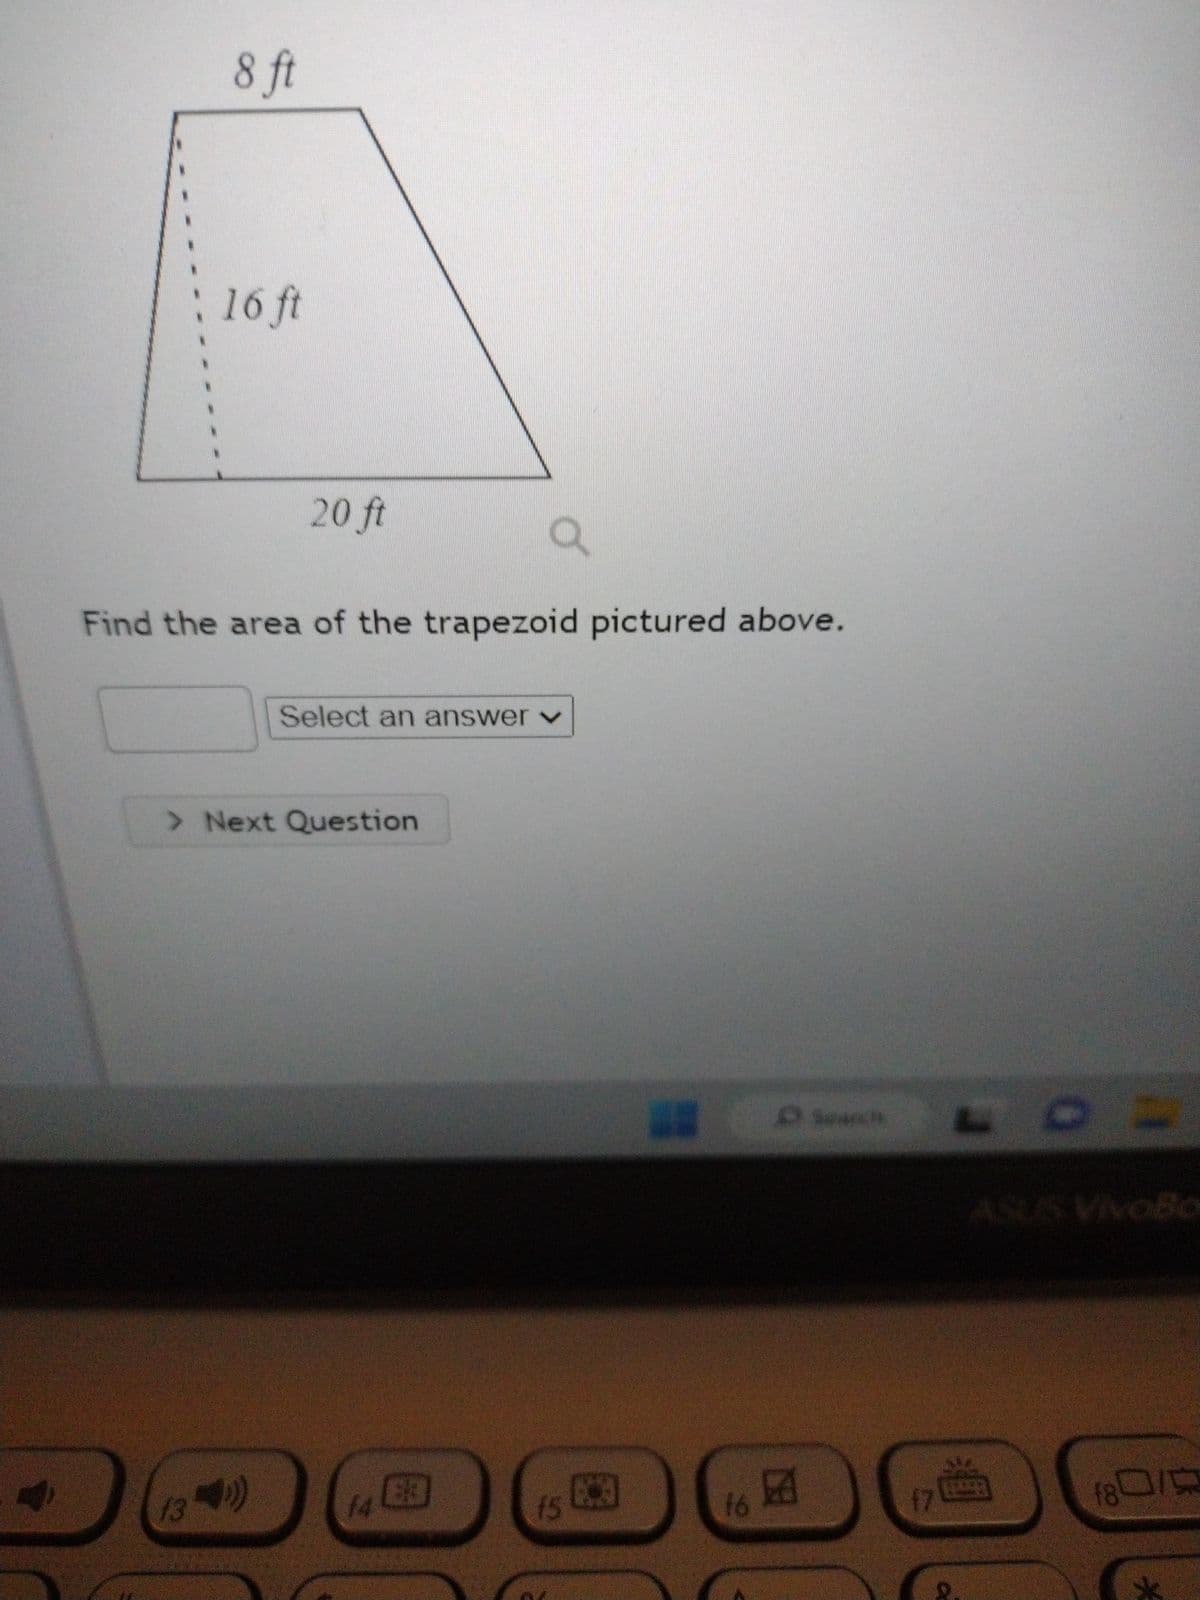 8 ft
16 ft
20 ft
Find the area of the trapezoid pictured above.
(()))
13
Select an answer v
> Next Question
f4
33
15
16
D Search
17
=
ASUS VivoBo
18 19